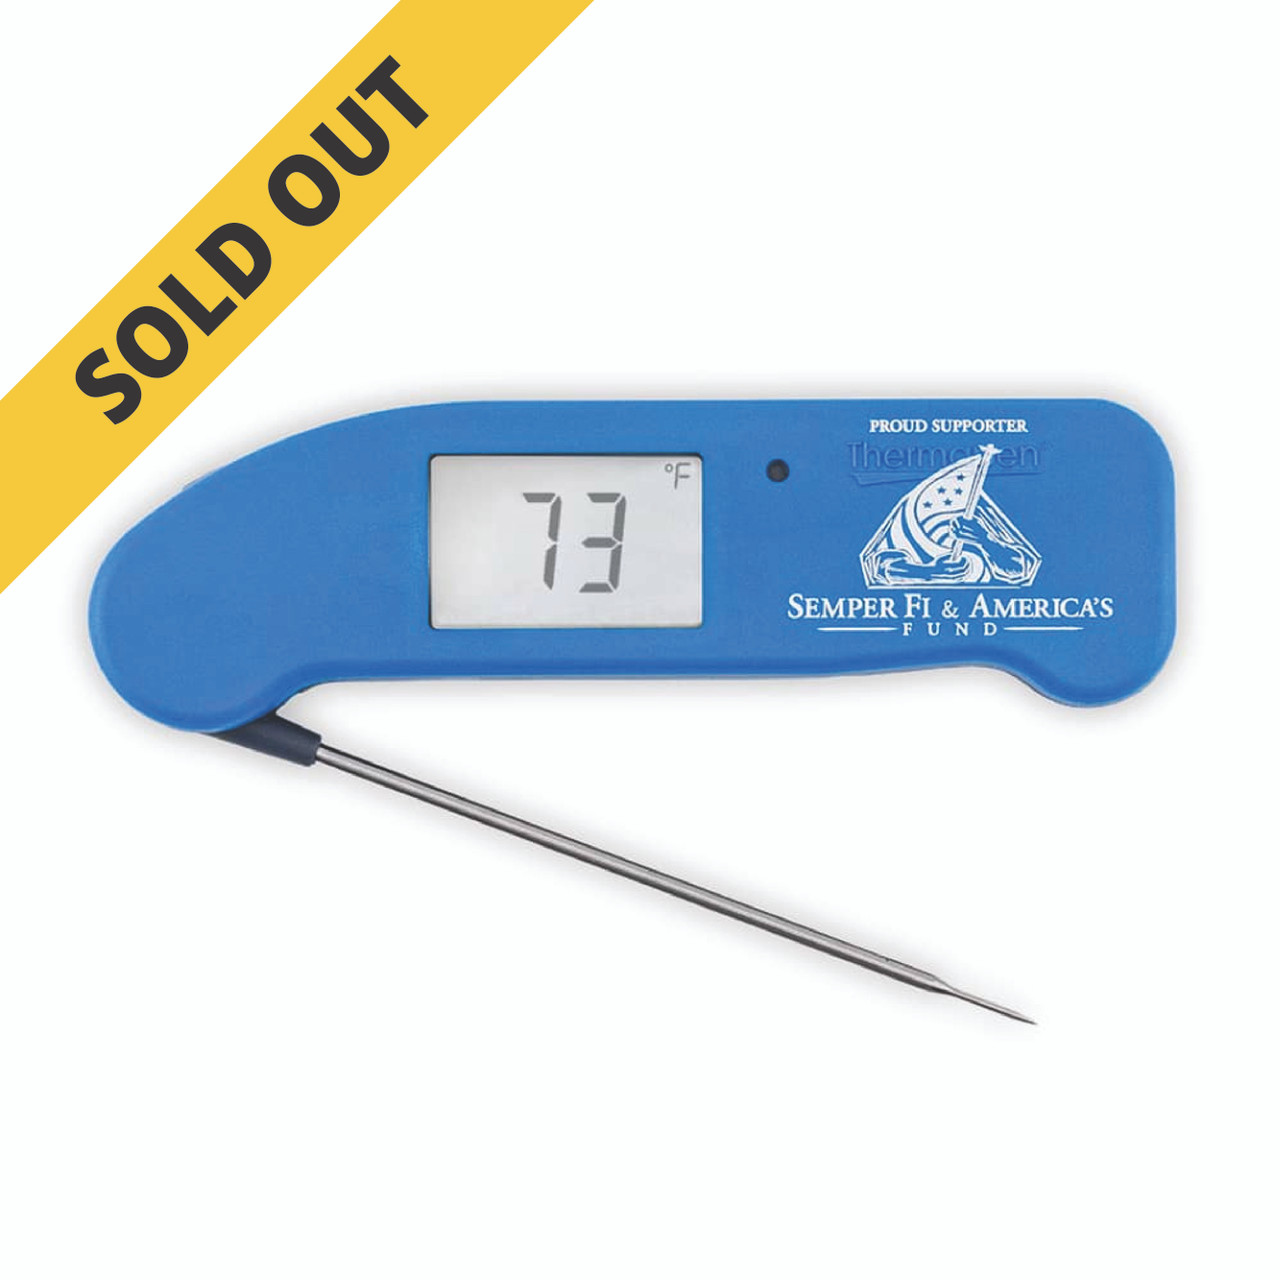  New! ThermoWorks Backlit Thermapen Mk4 Professional